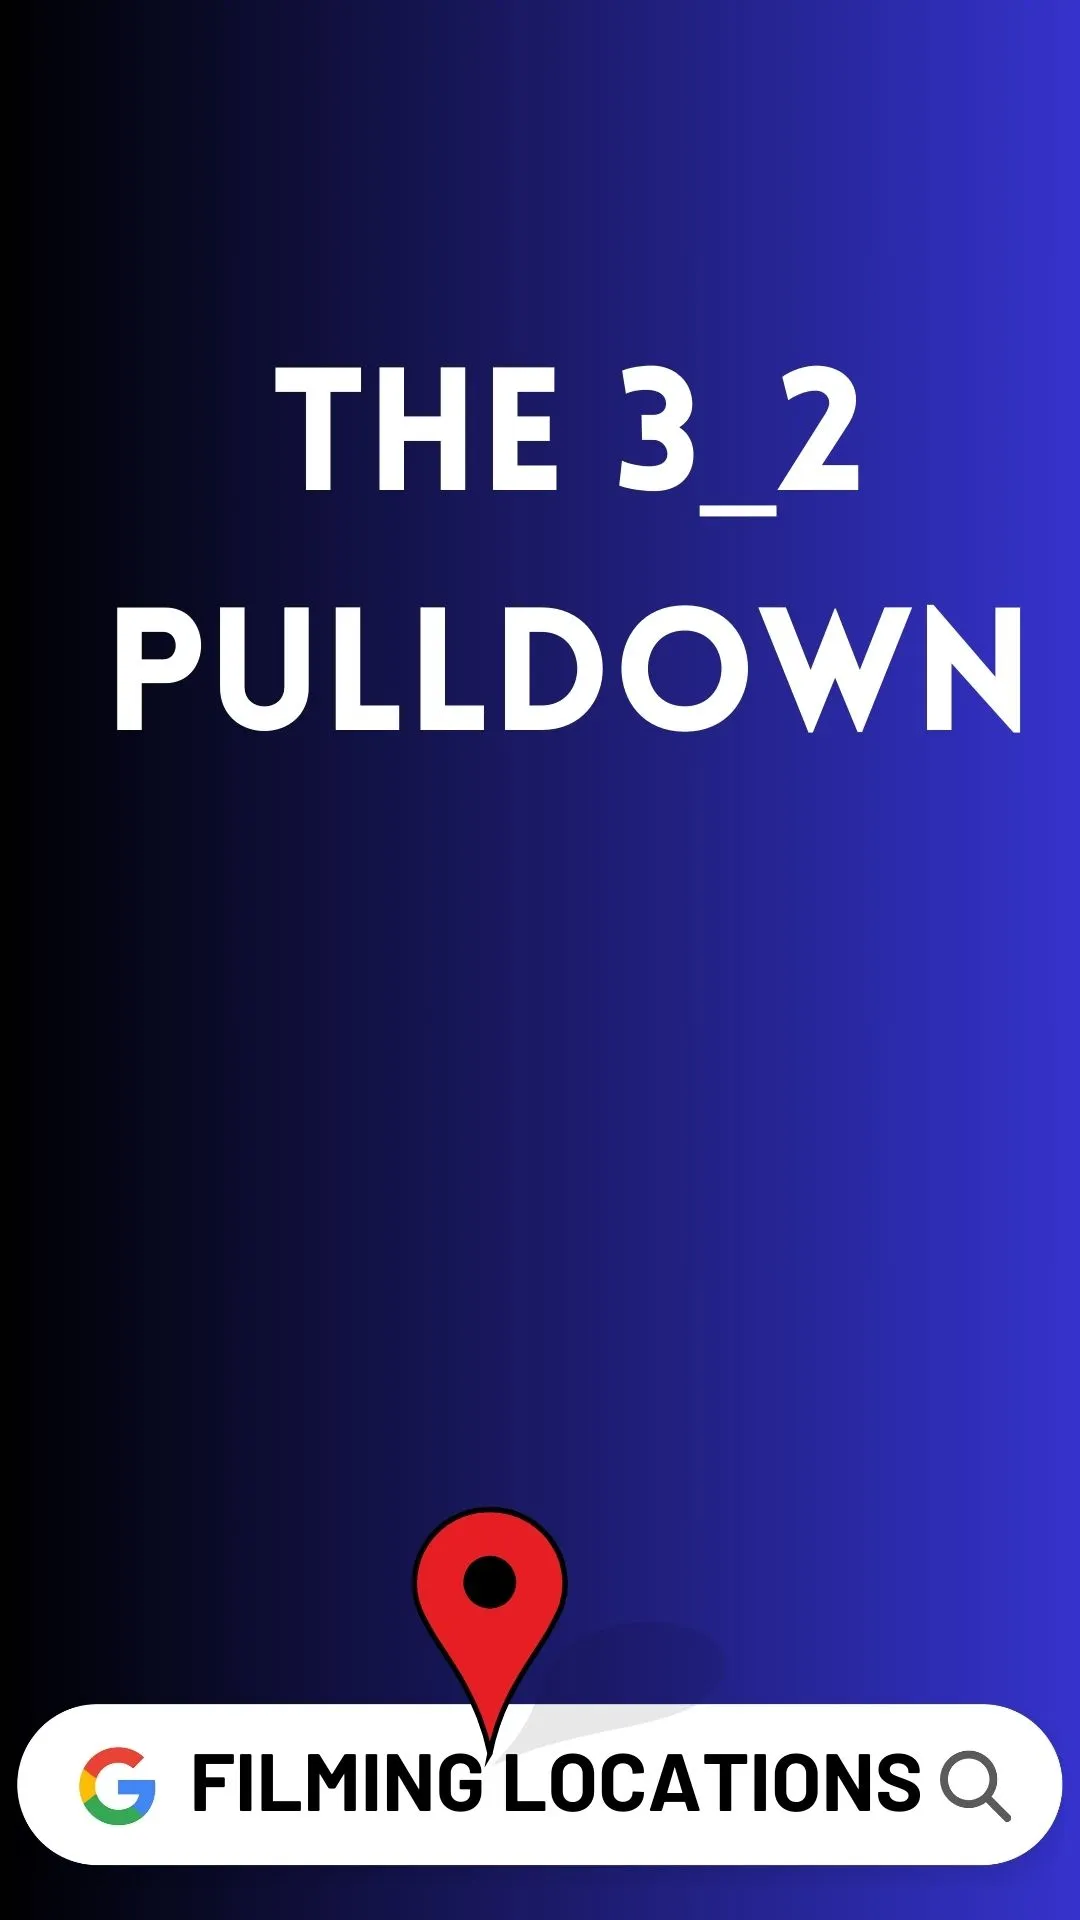 The 3_2 Pulldown Filming Locations